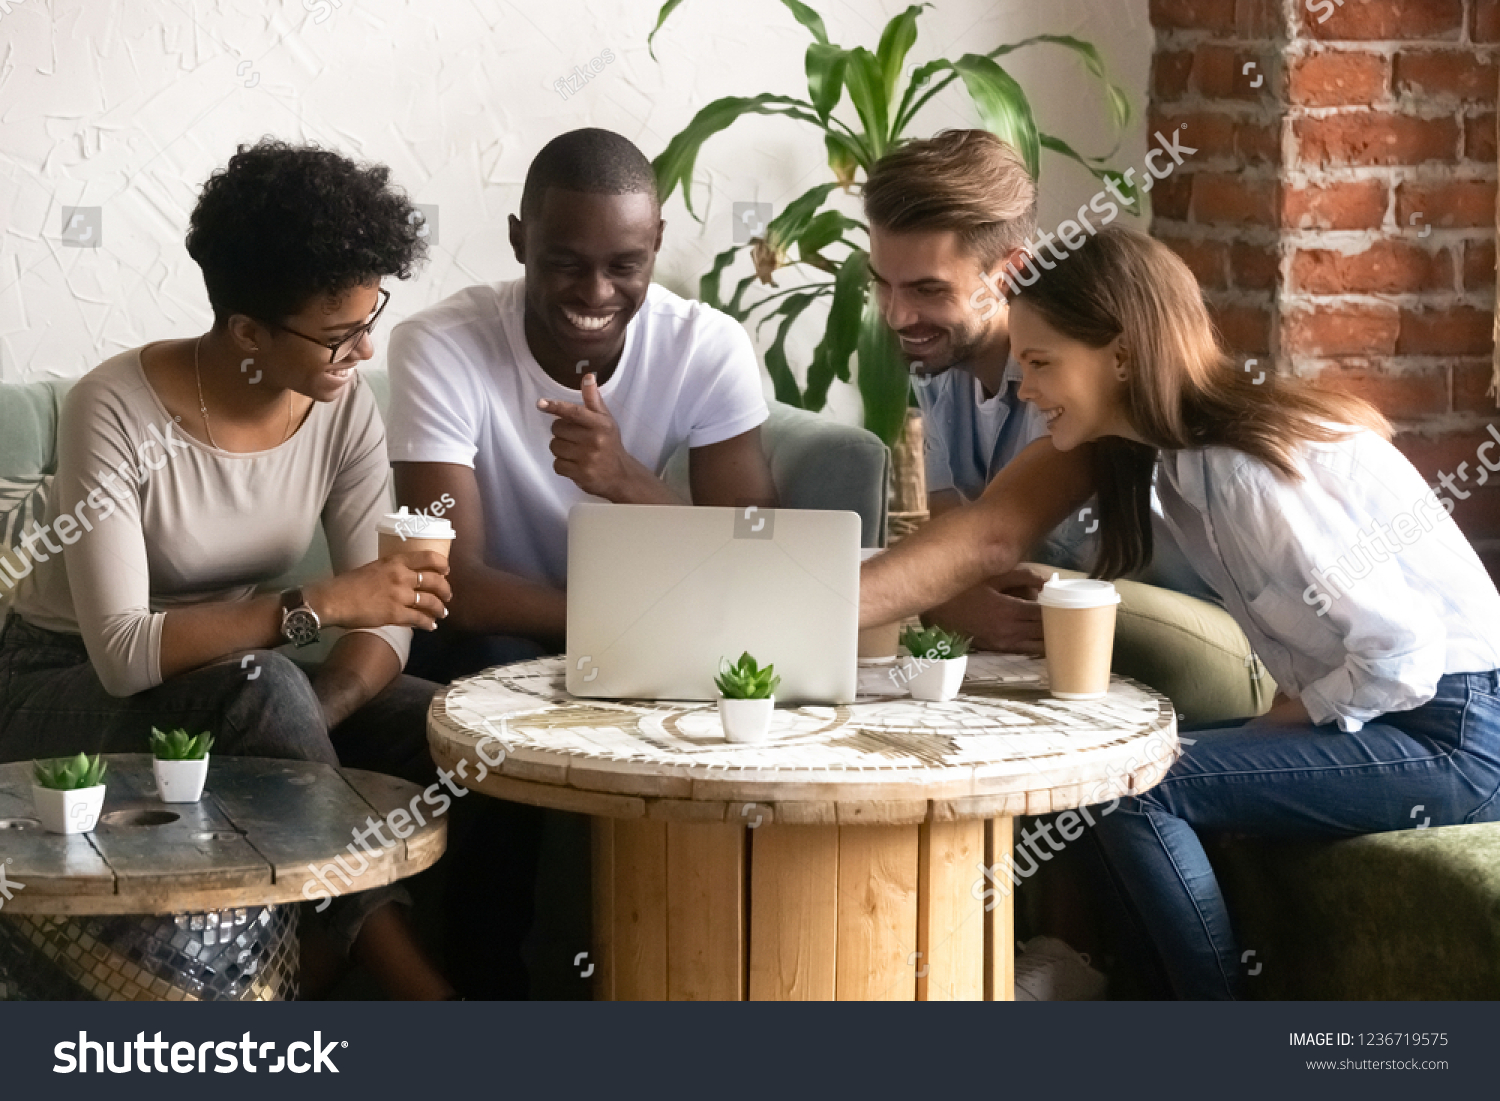 Happy smiling diverse friends using laptop together in cafe, watching funny video online, comedy movie during lunch in coffee house, multiracial people having fun together, free time activities #1236719575